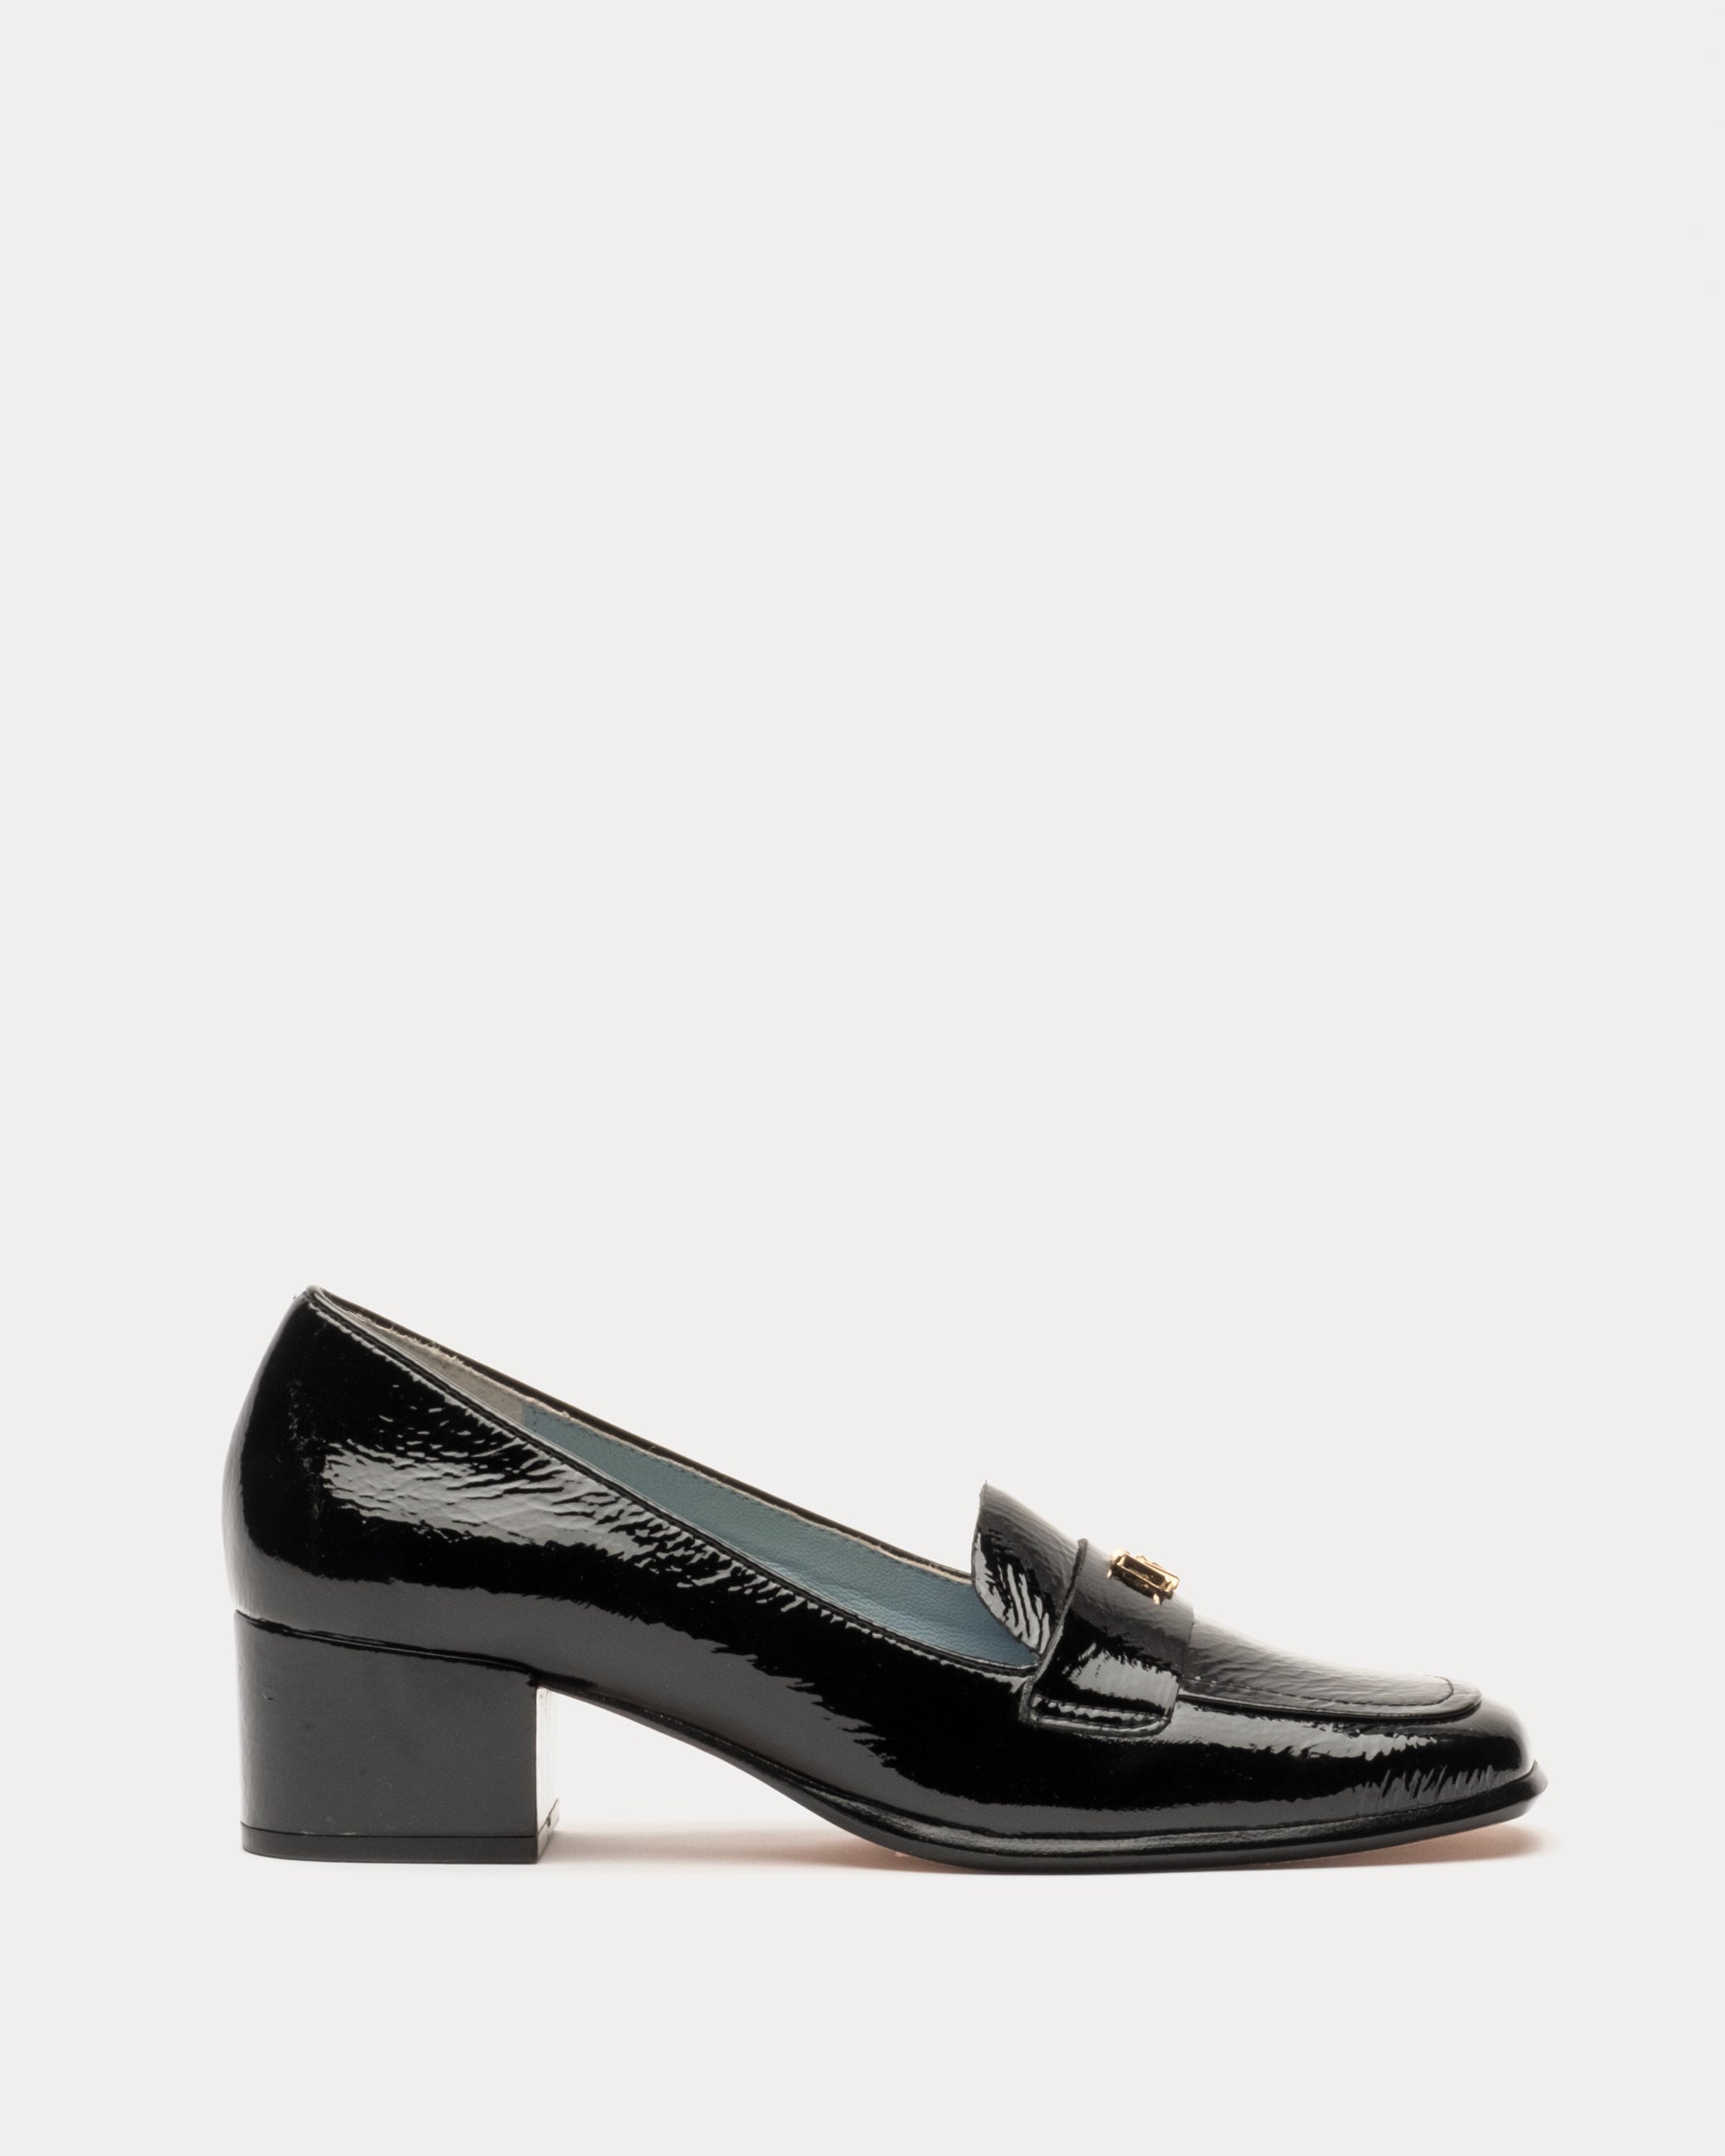 Twiggy Crinkle Soft Patent Loafer Black